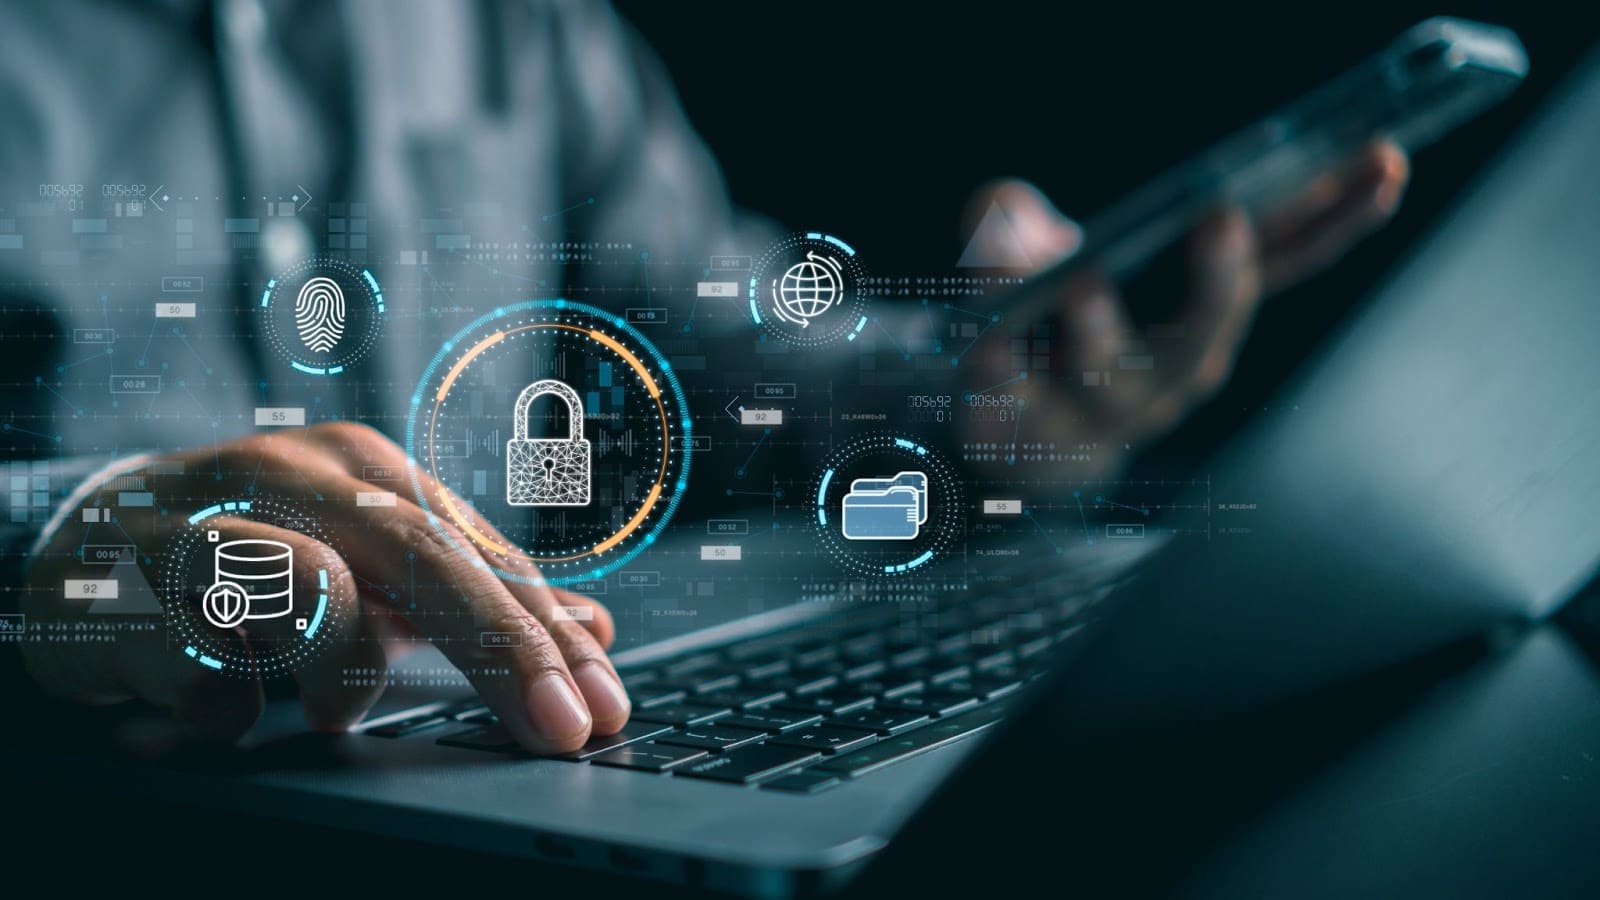 Digital wealth management brings convenience and accessibility but also poses cybersecurity and data privacy challenges, benefiting and challenging investors in the digital age.